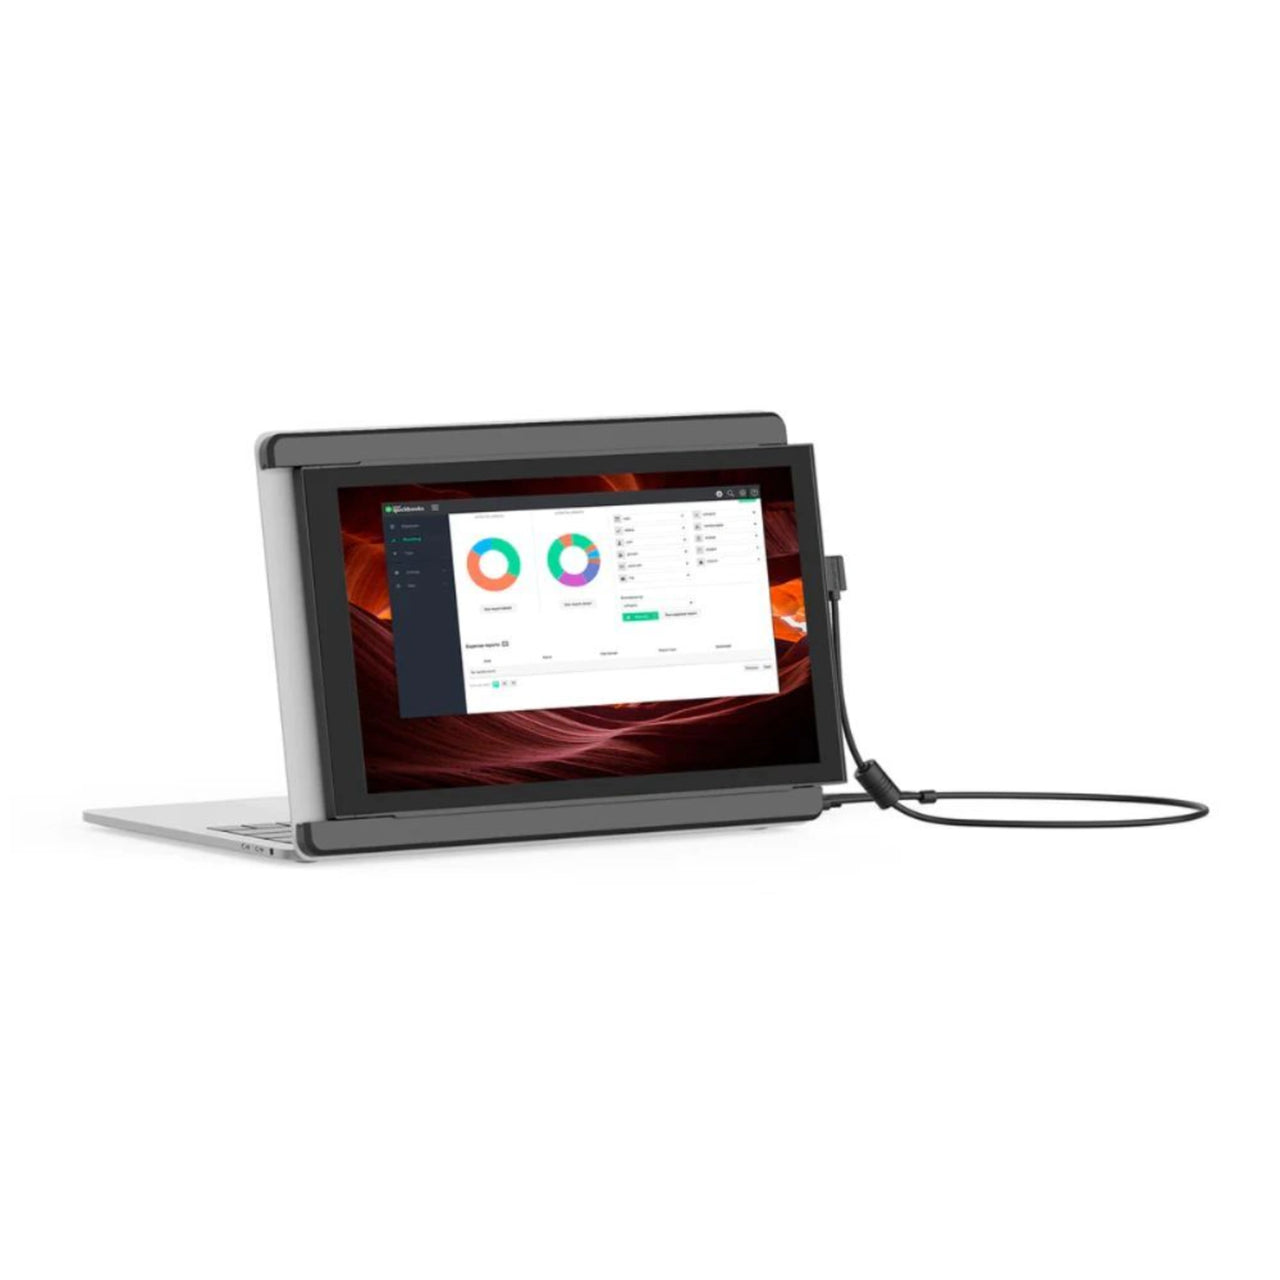 Mobile Pixels Duex Lite Portable Laptop Monitor 12.5 inch (Grey) available in Australia from Sammat Education